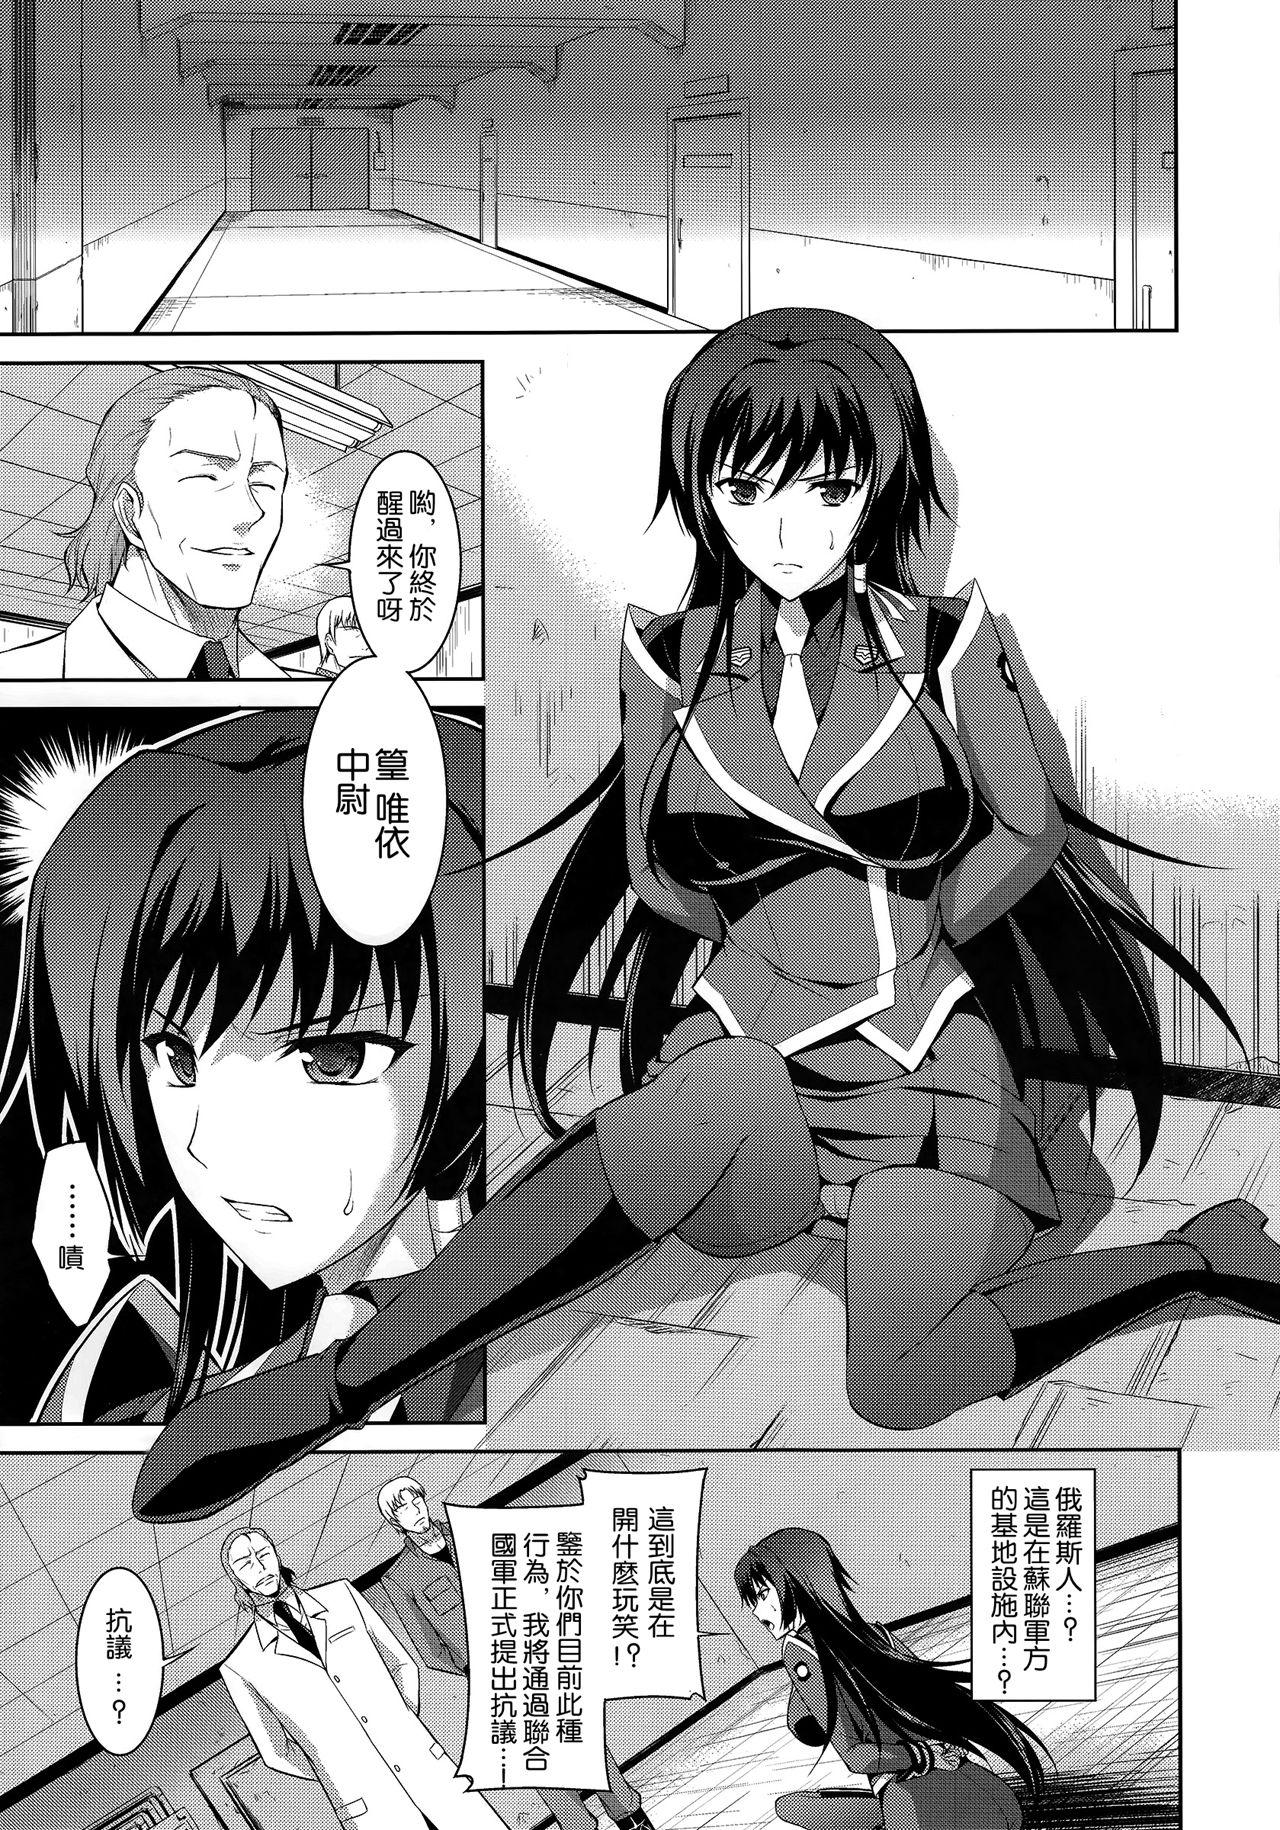 Hairy Sexy Ouka Chiru! - Muv luv alternative total eclipse Car - Page 5